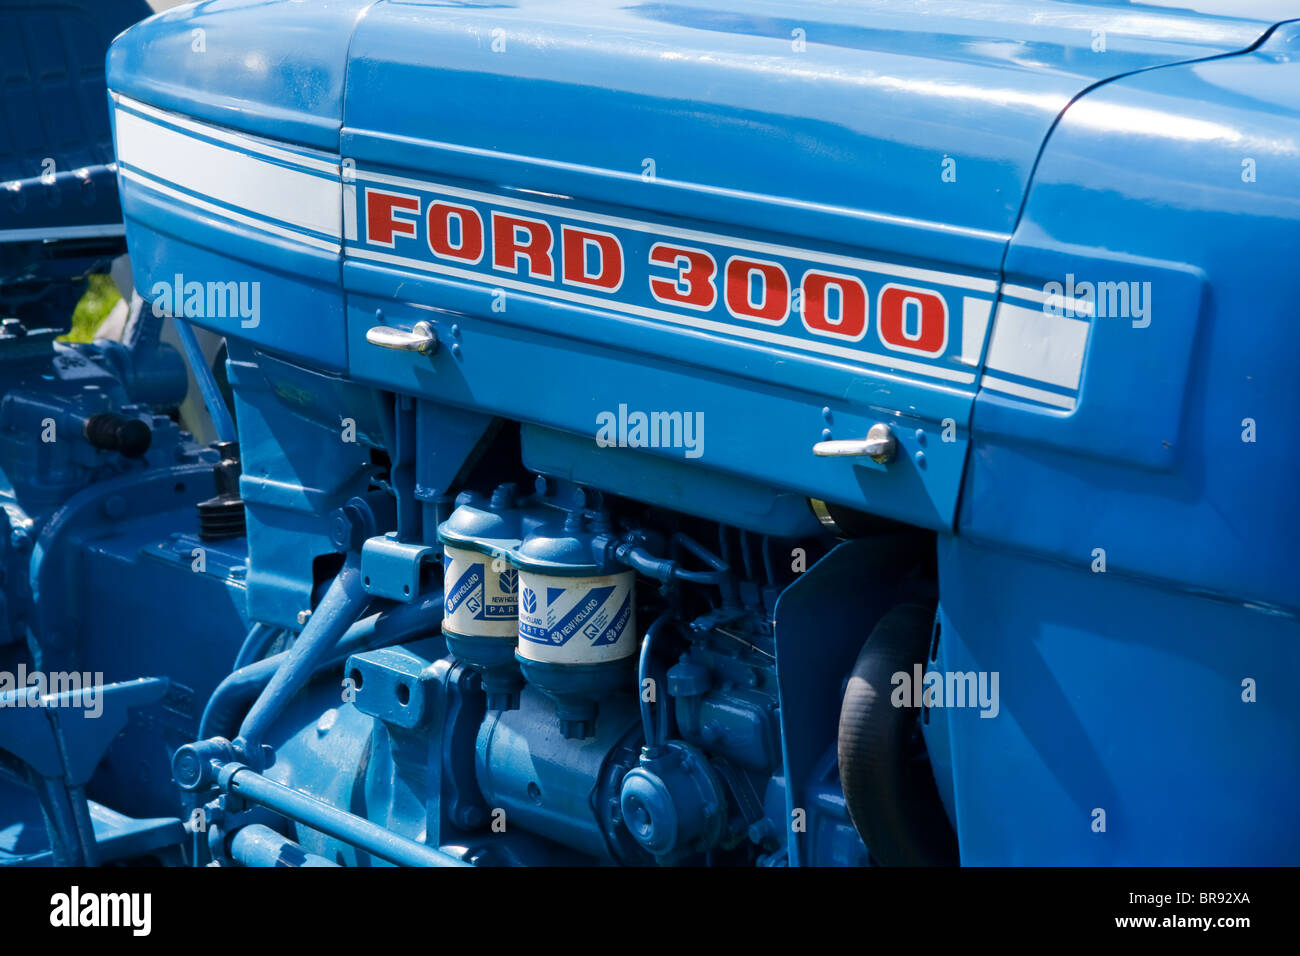 Ford 3000 vintage tractor Stock Photo